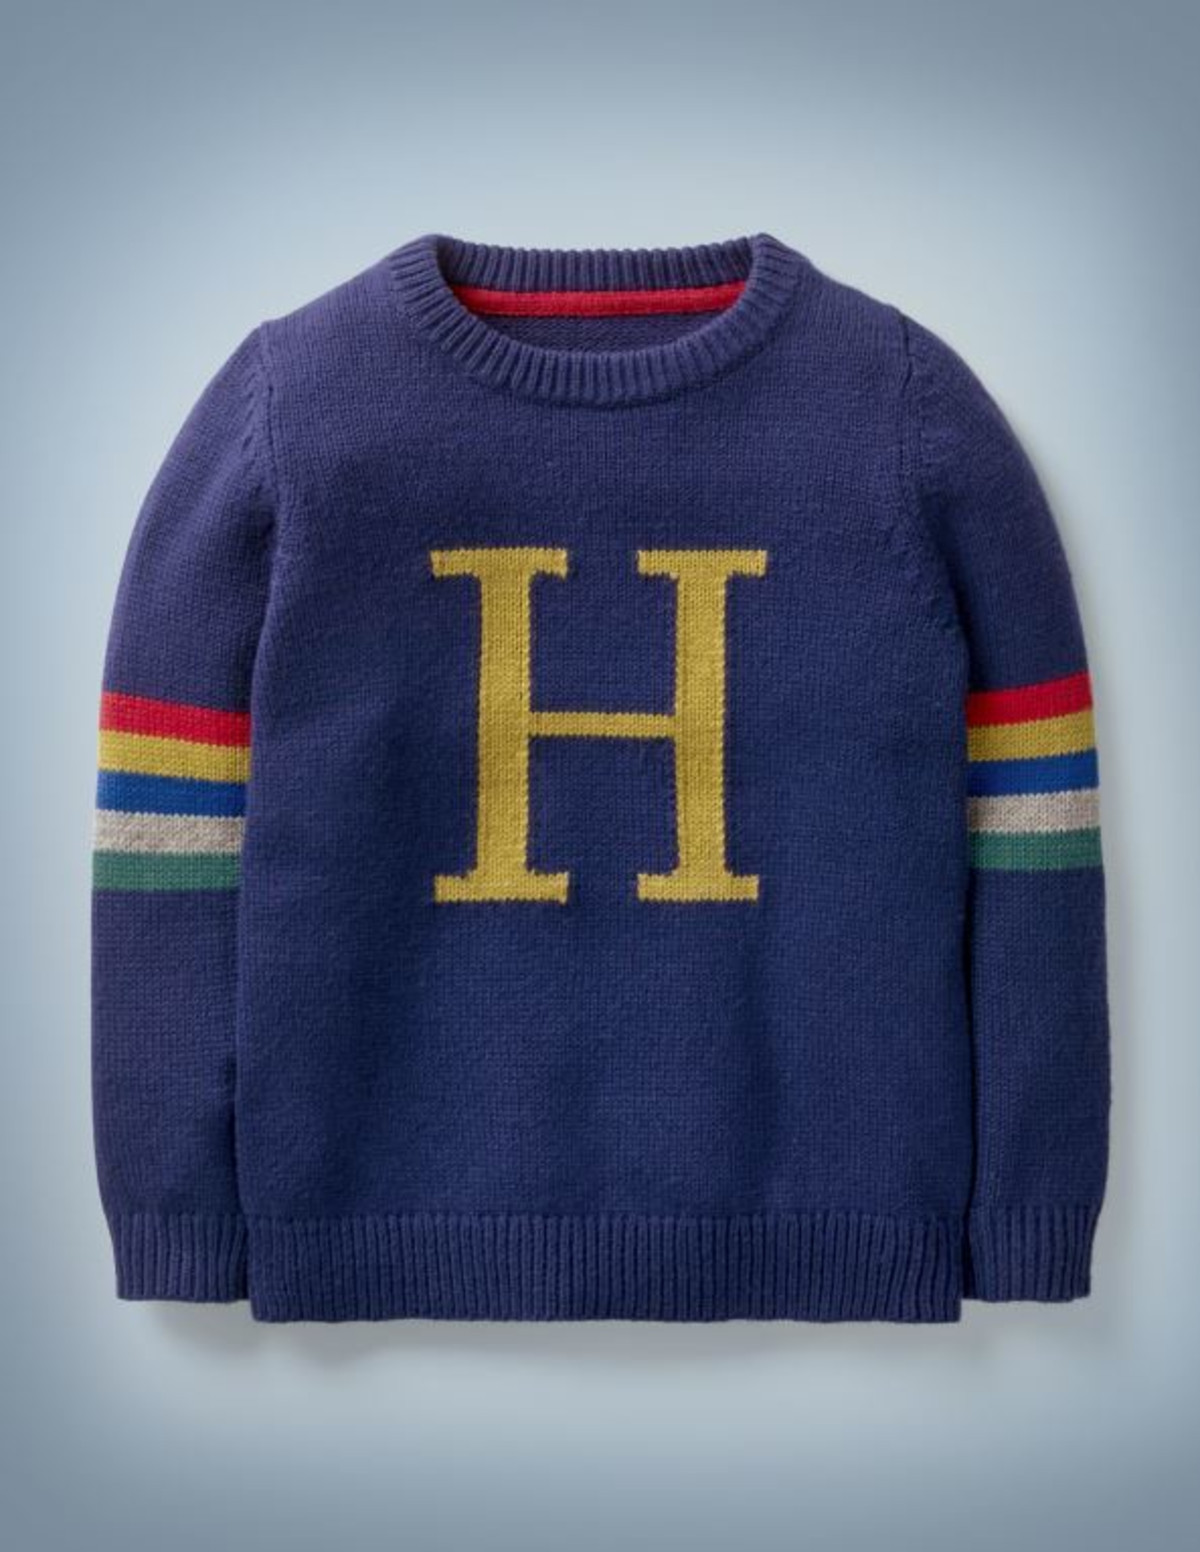 Mini Boden launches new Harry Potter-inspired collection for children